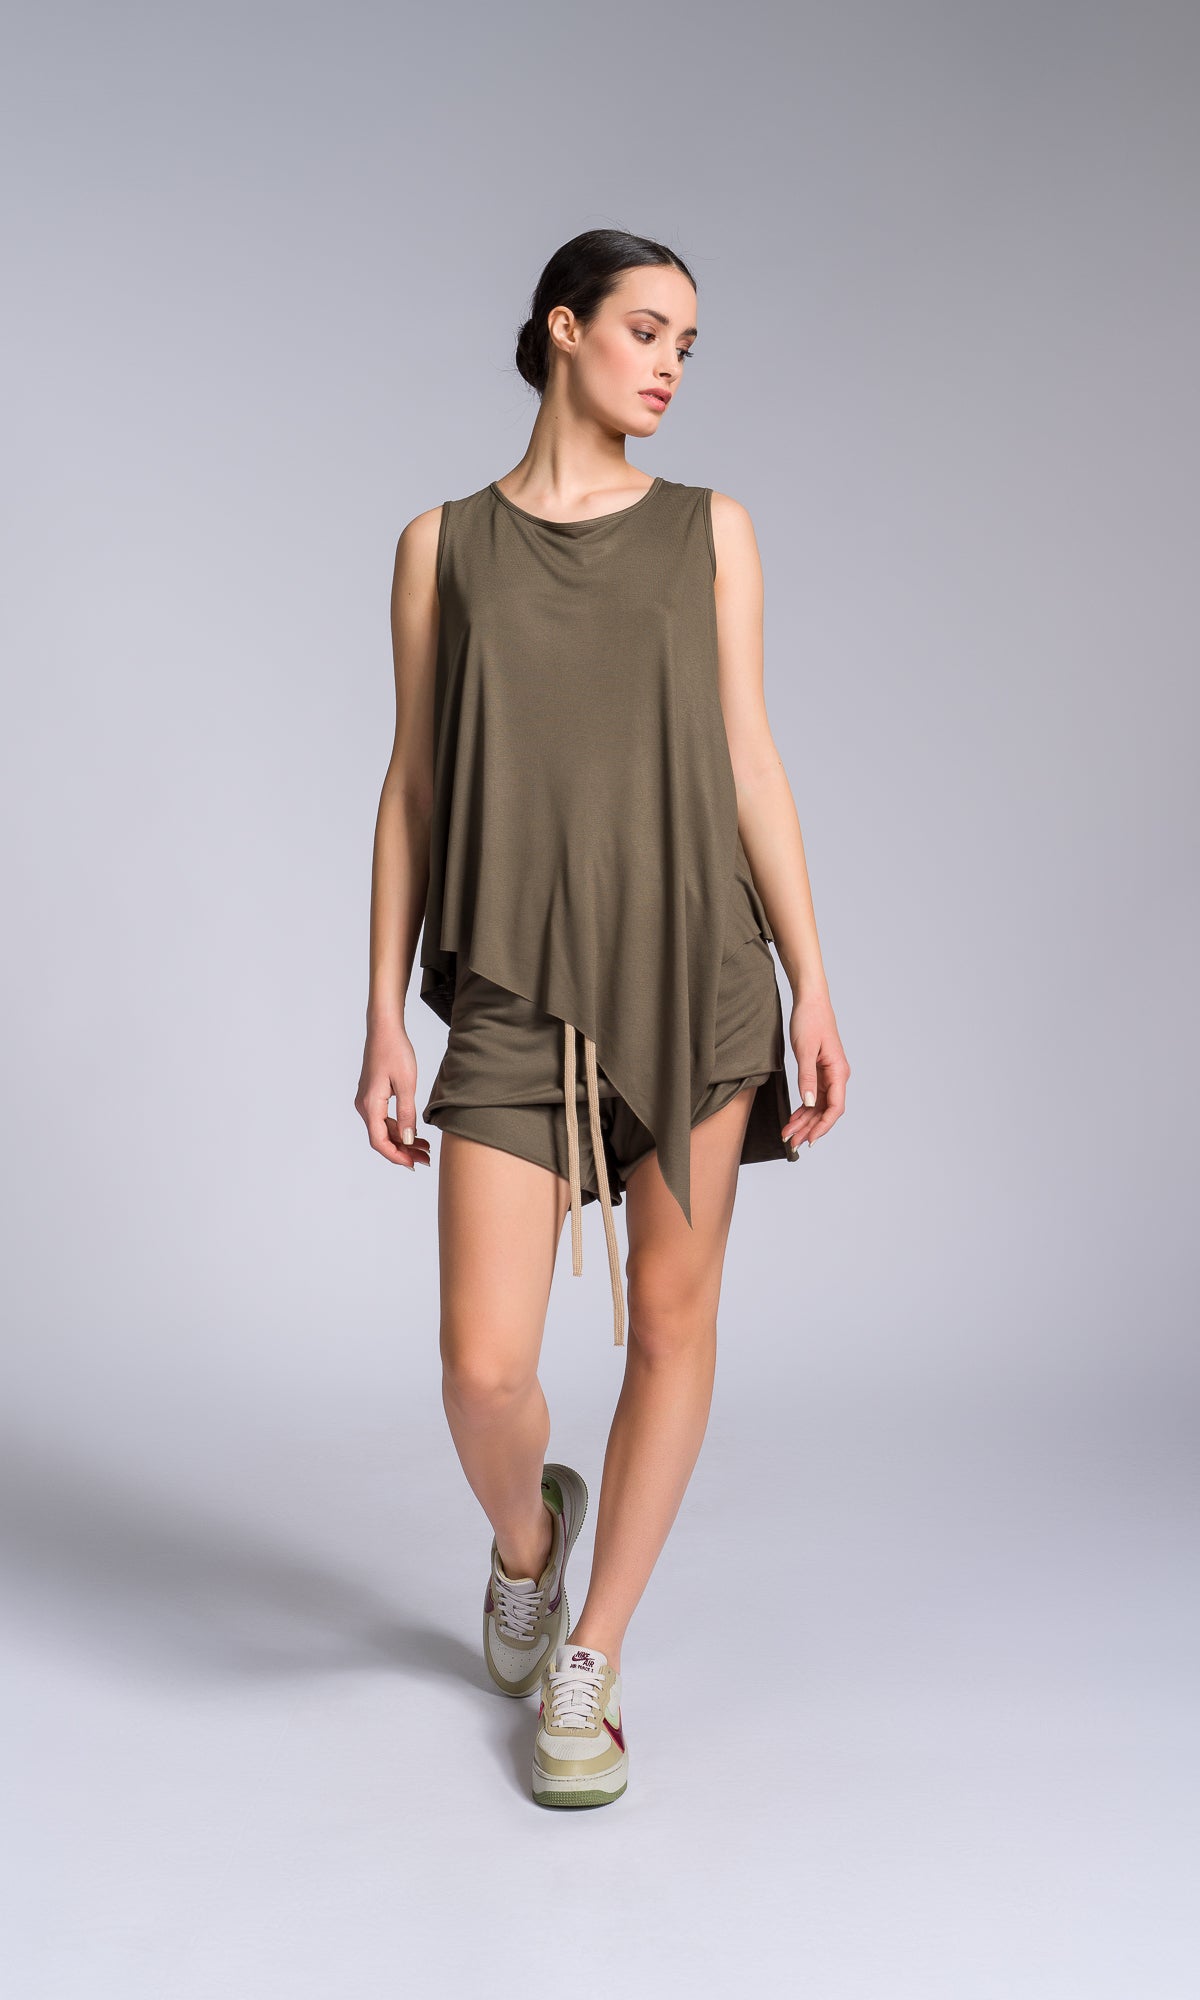 Two-piece Set of Asymmetric Tank Top and Shorts with Skirt Overlay